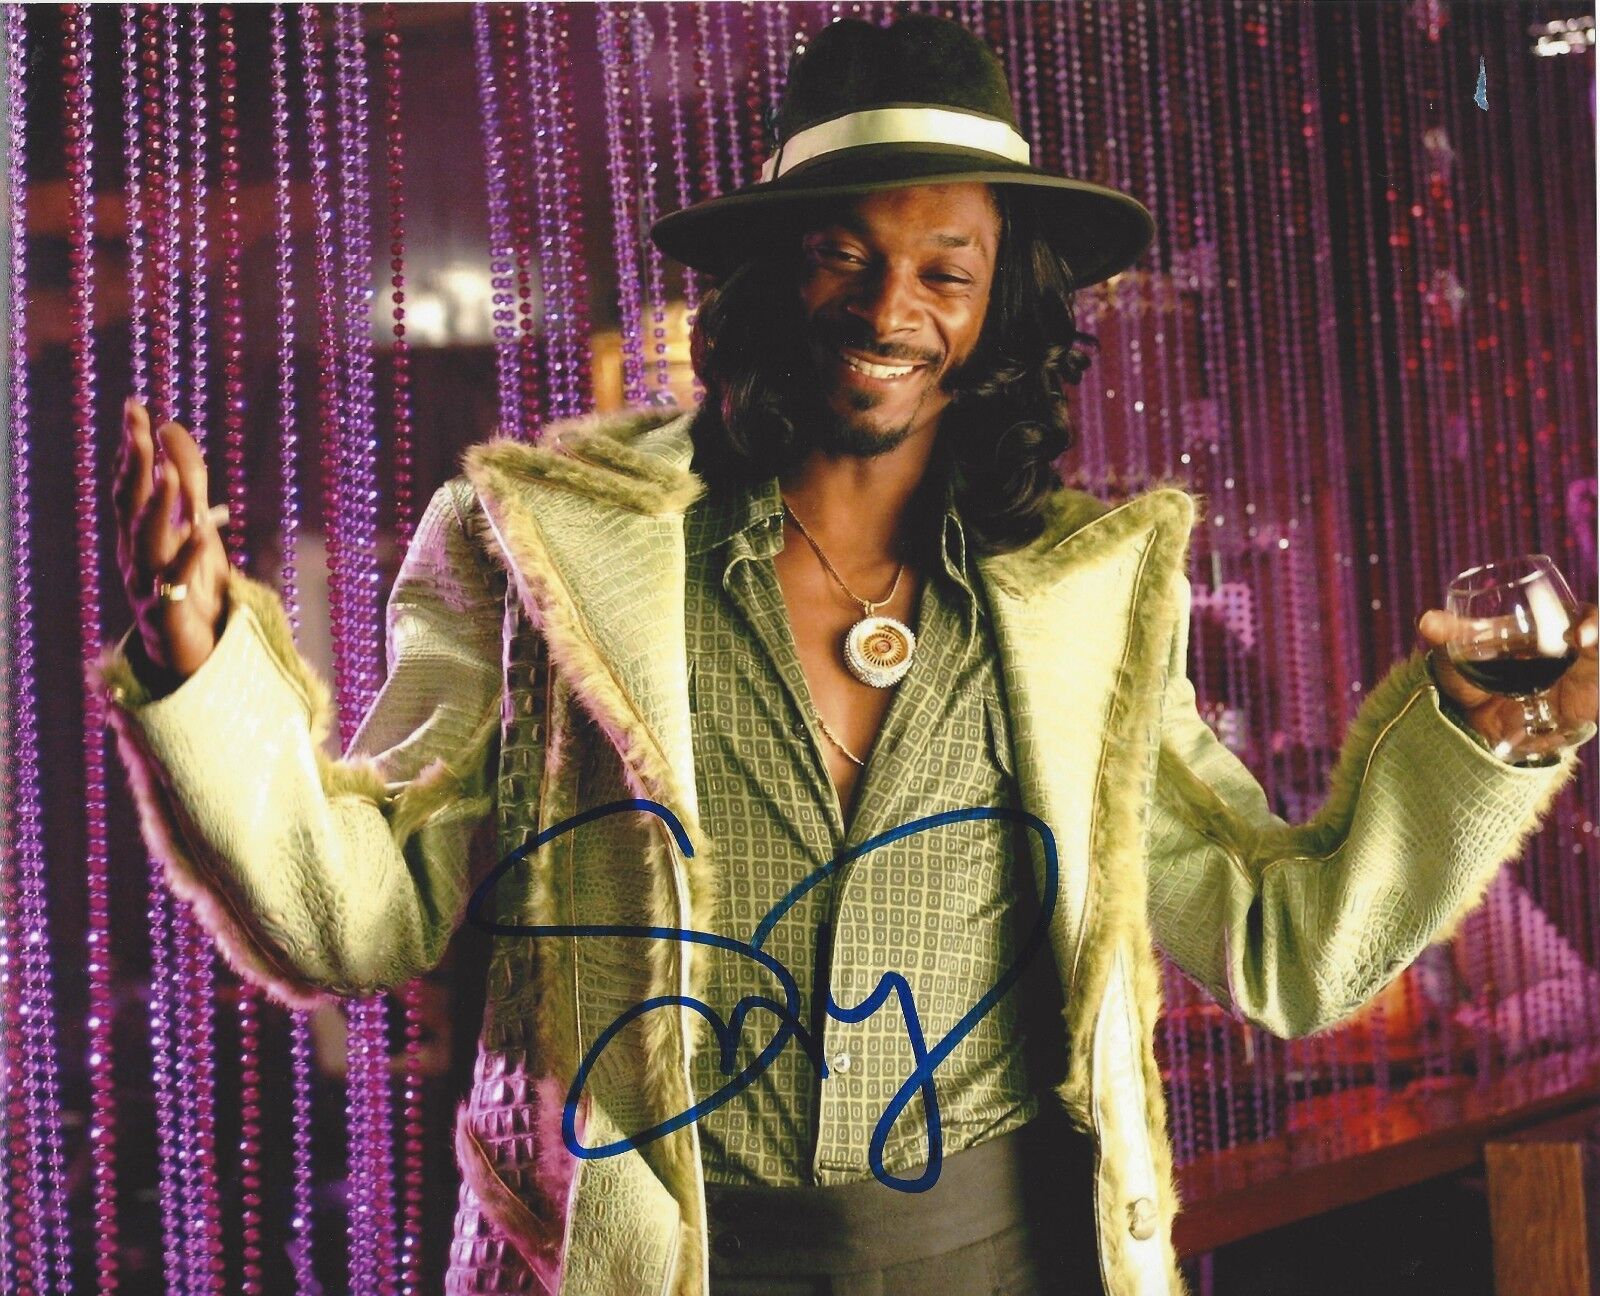 SNOOP DOGG HUGGY BEAR SIGNED 8X10 Photo Poster painting W/COA RAPPER STARSKY AND HUTCH